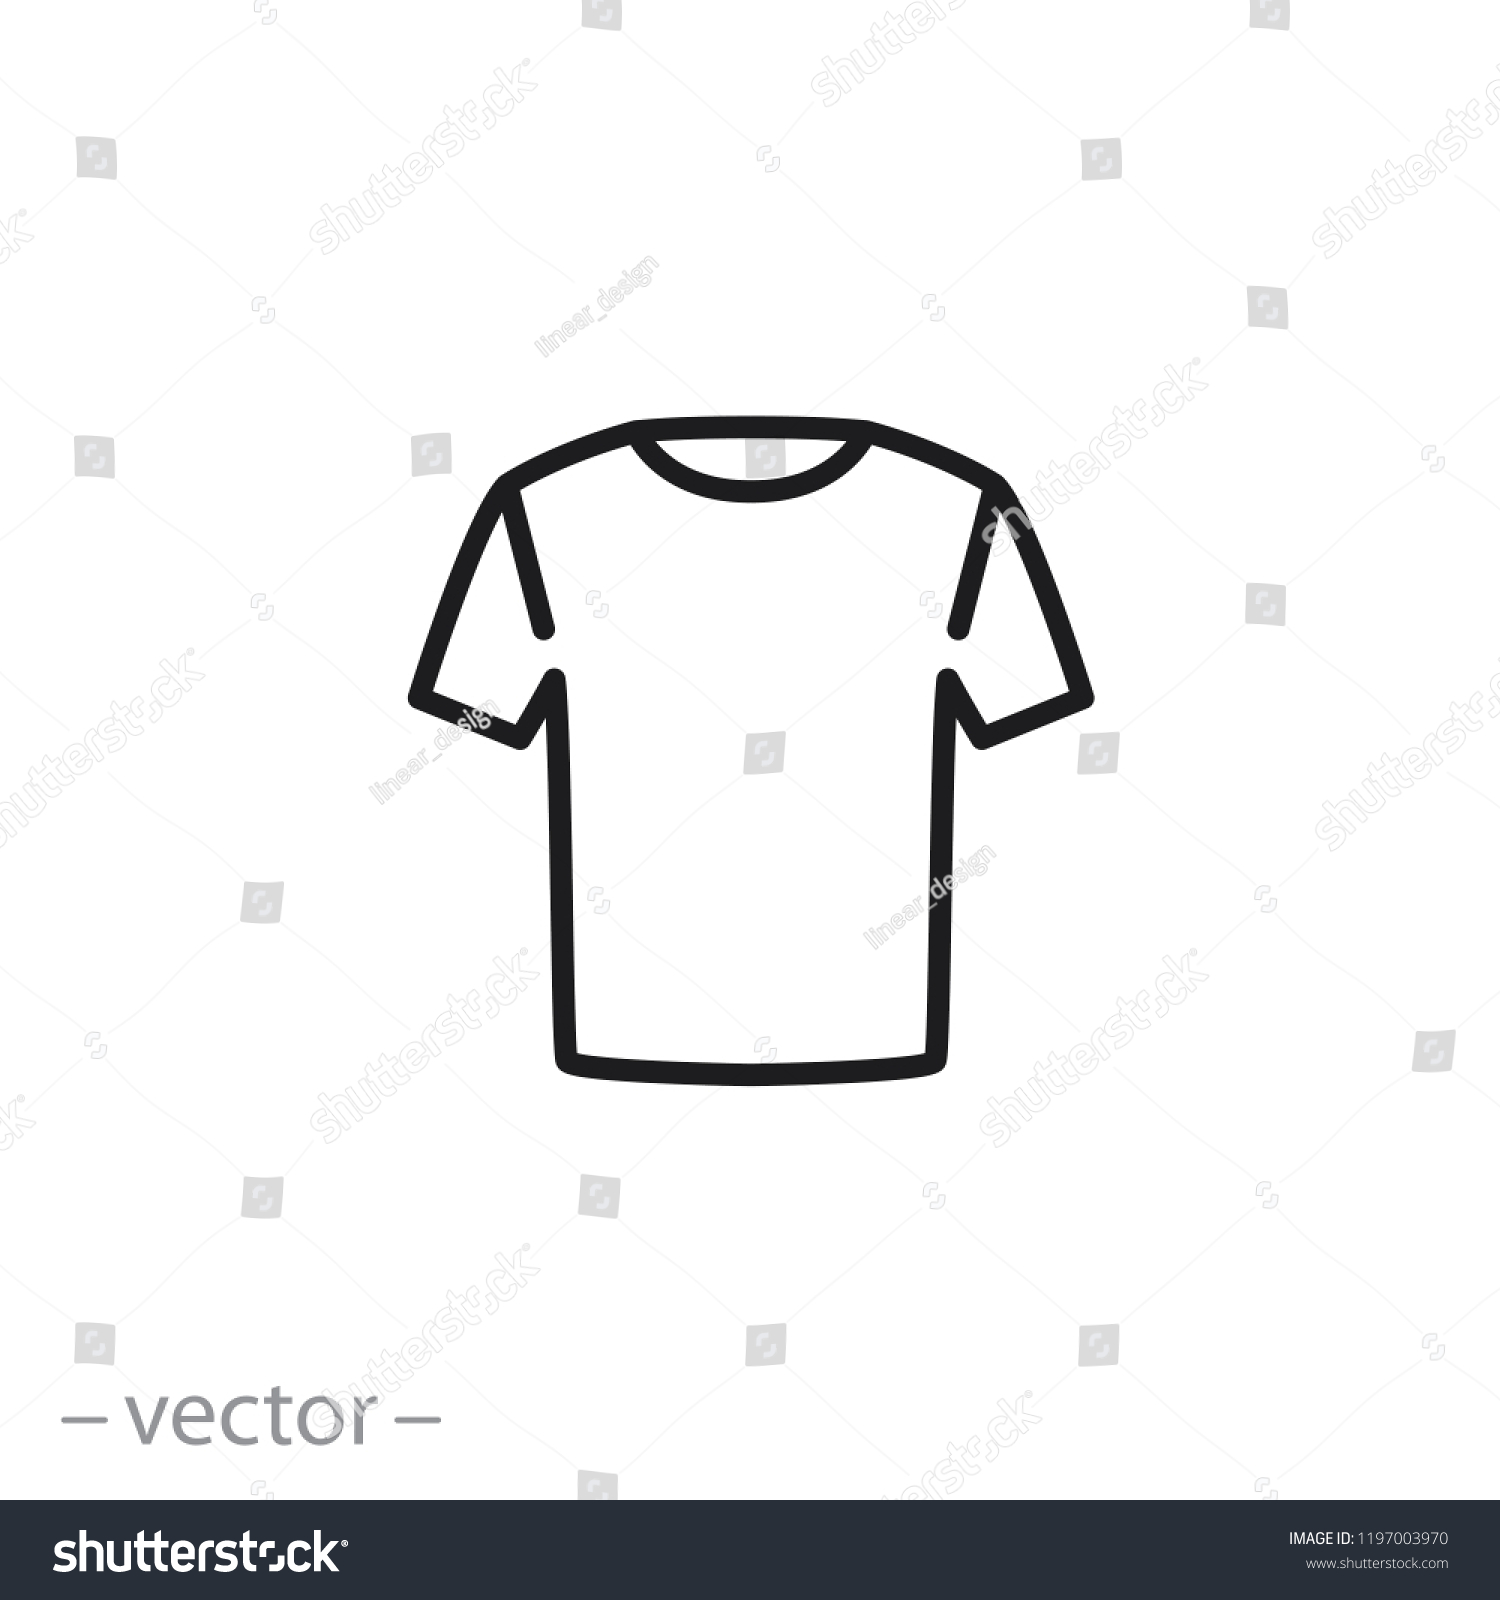 t-shirt icon, linear sign isolated on white background - vector illustration eps10 #1197003970